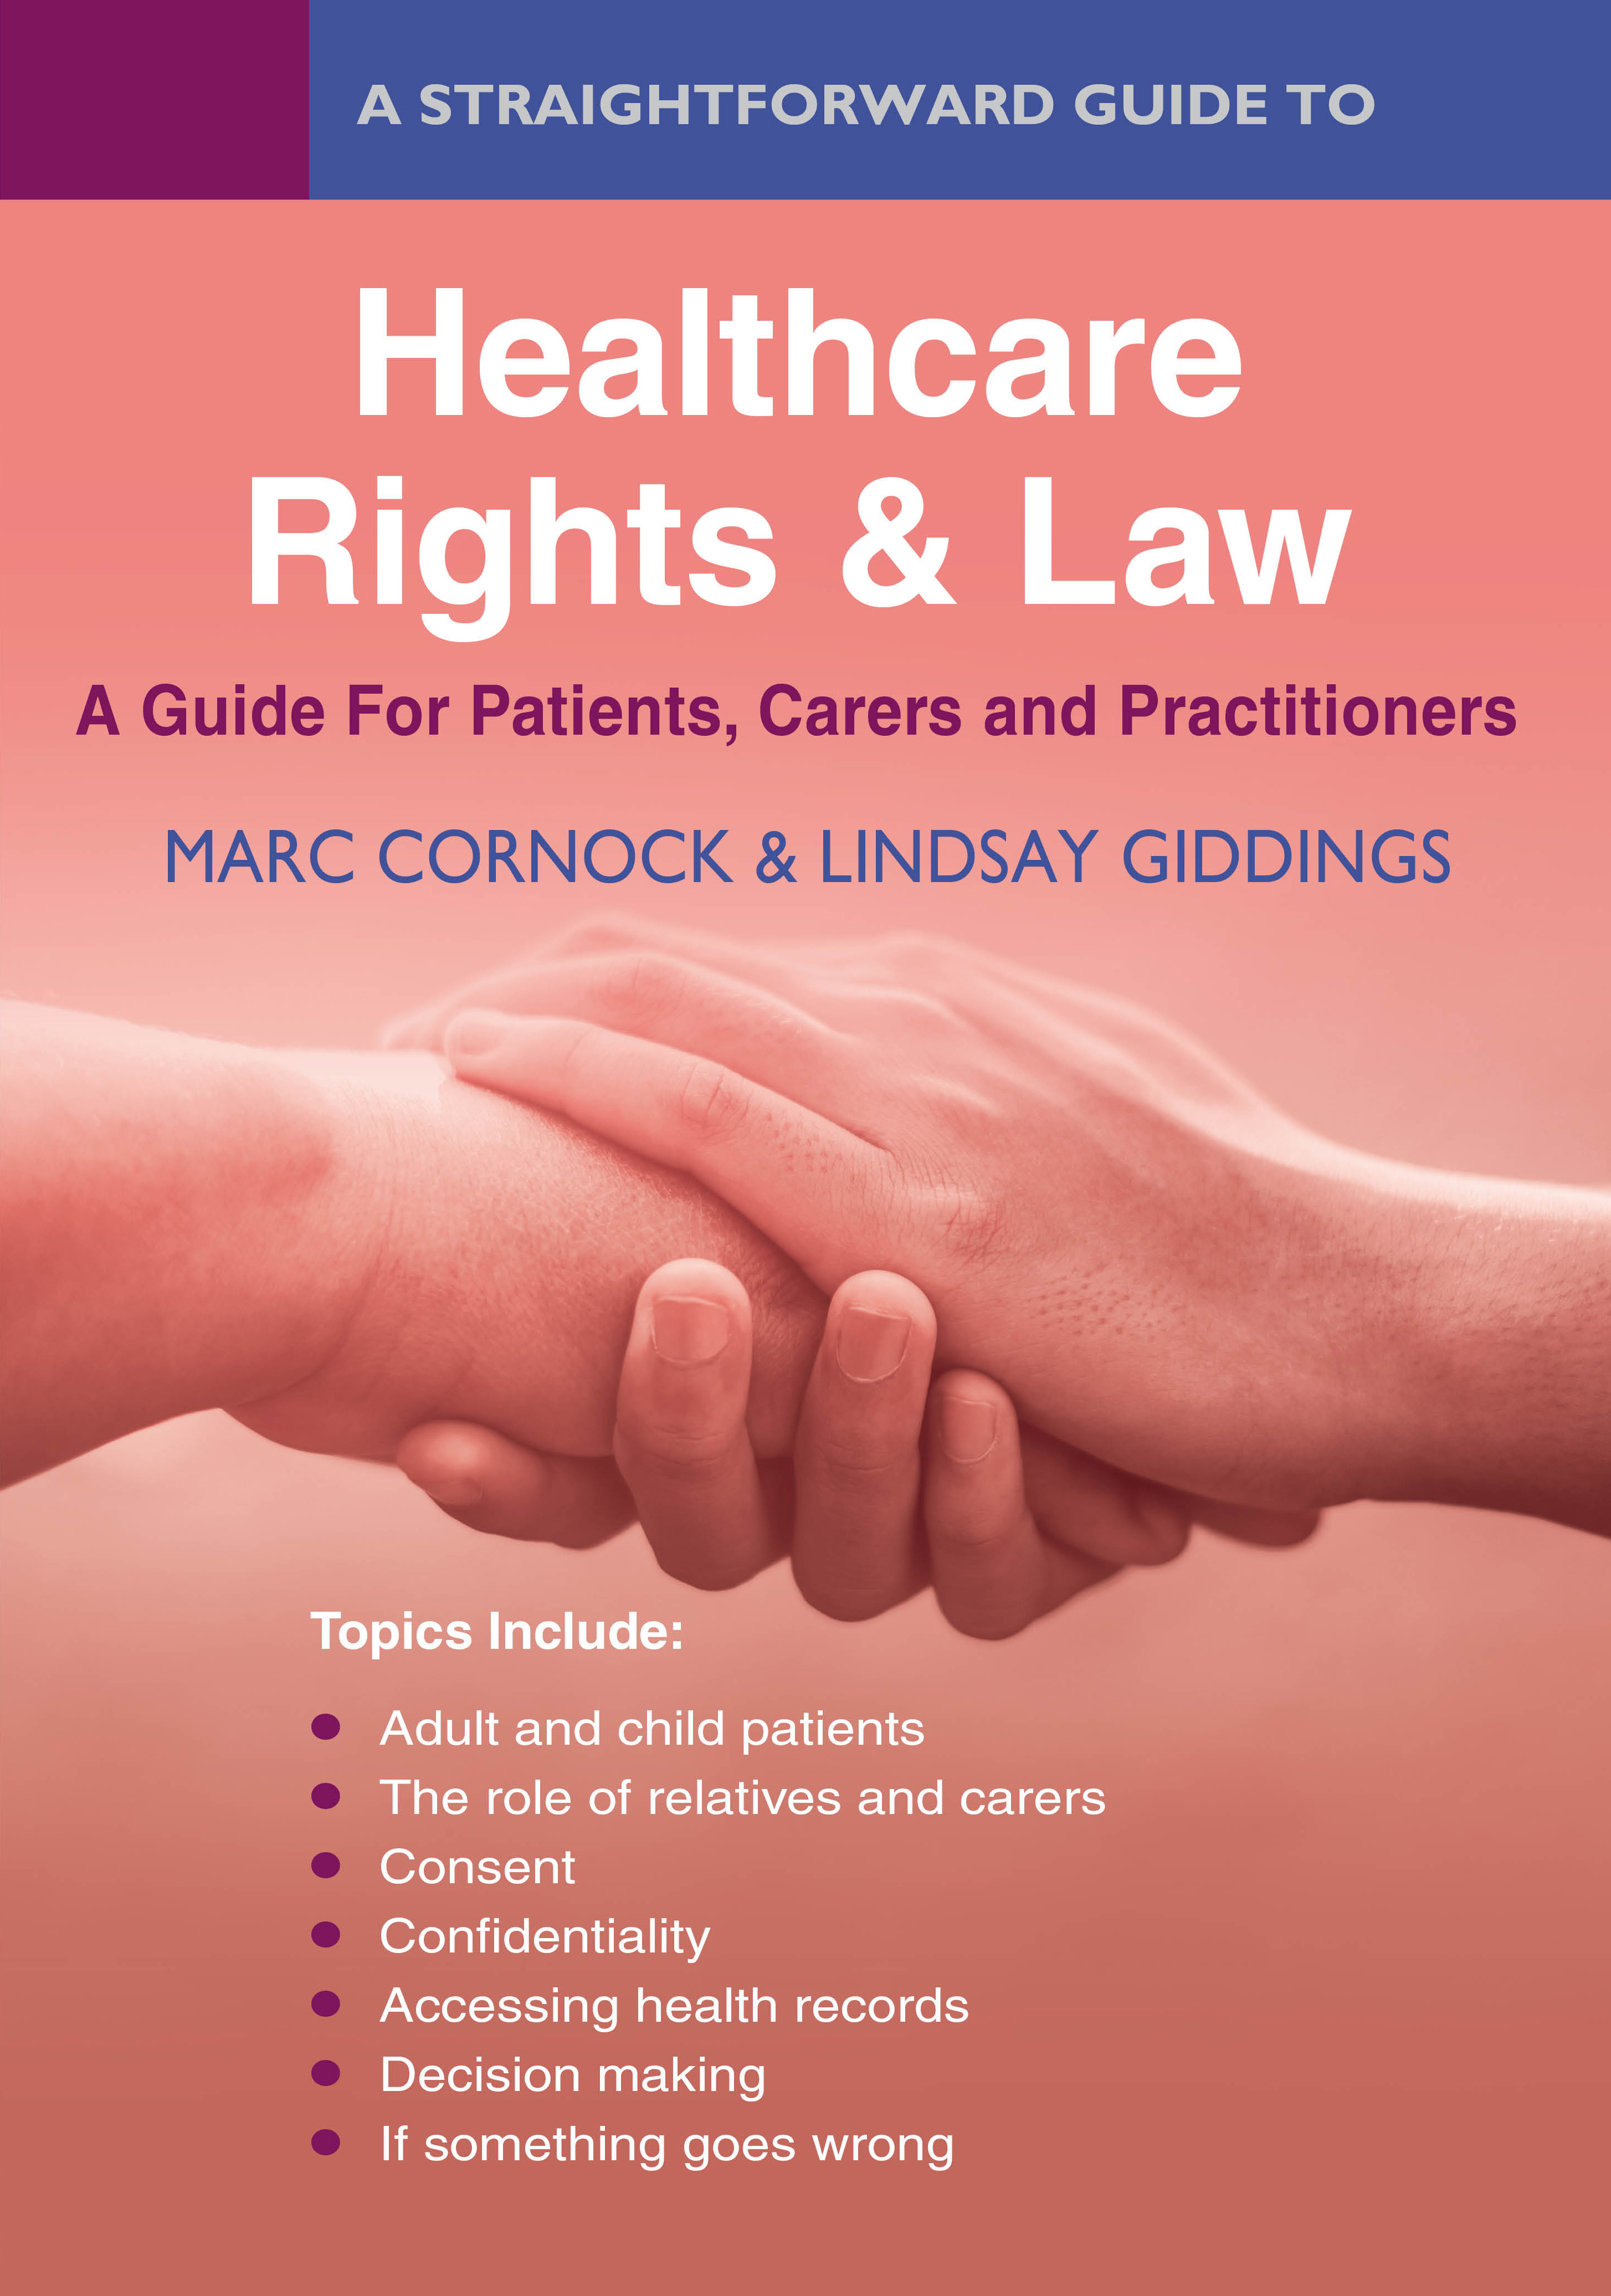 COMPREHENSIVE GUIDE TO HEALTHCARE RIGHTS OF PATIENTS, CARERS AND  PRACTITIONERS